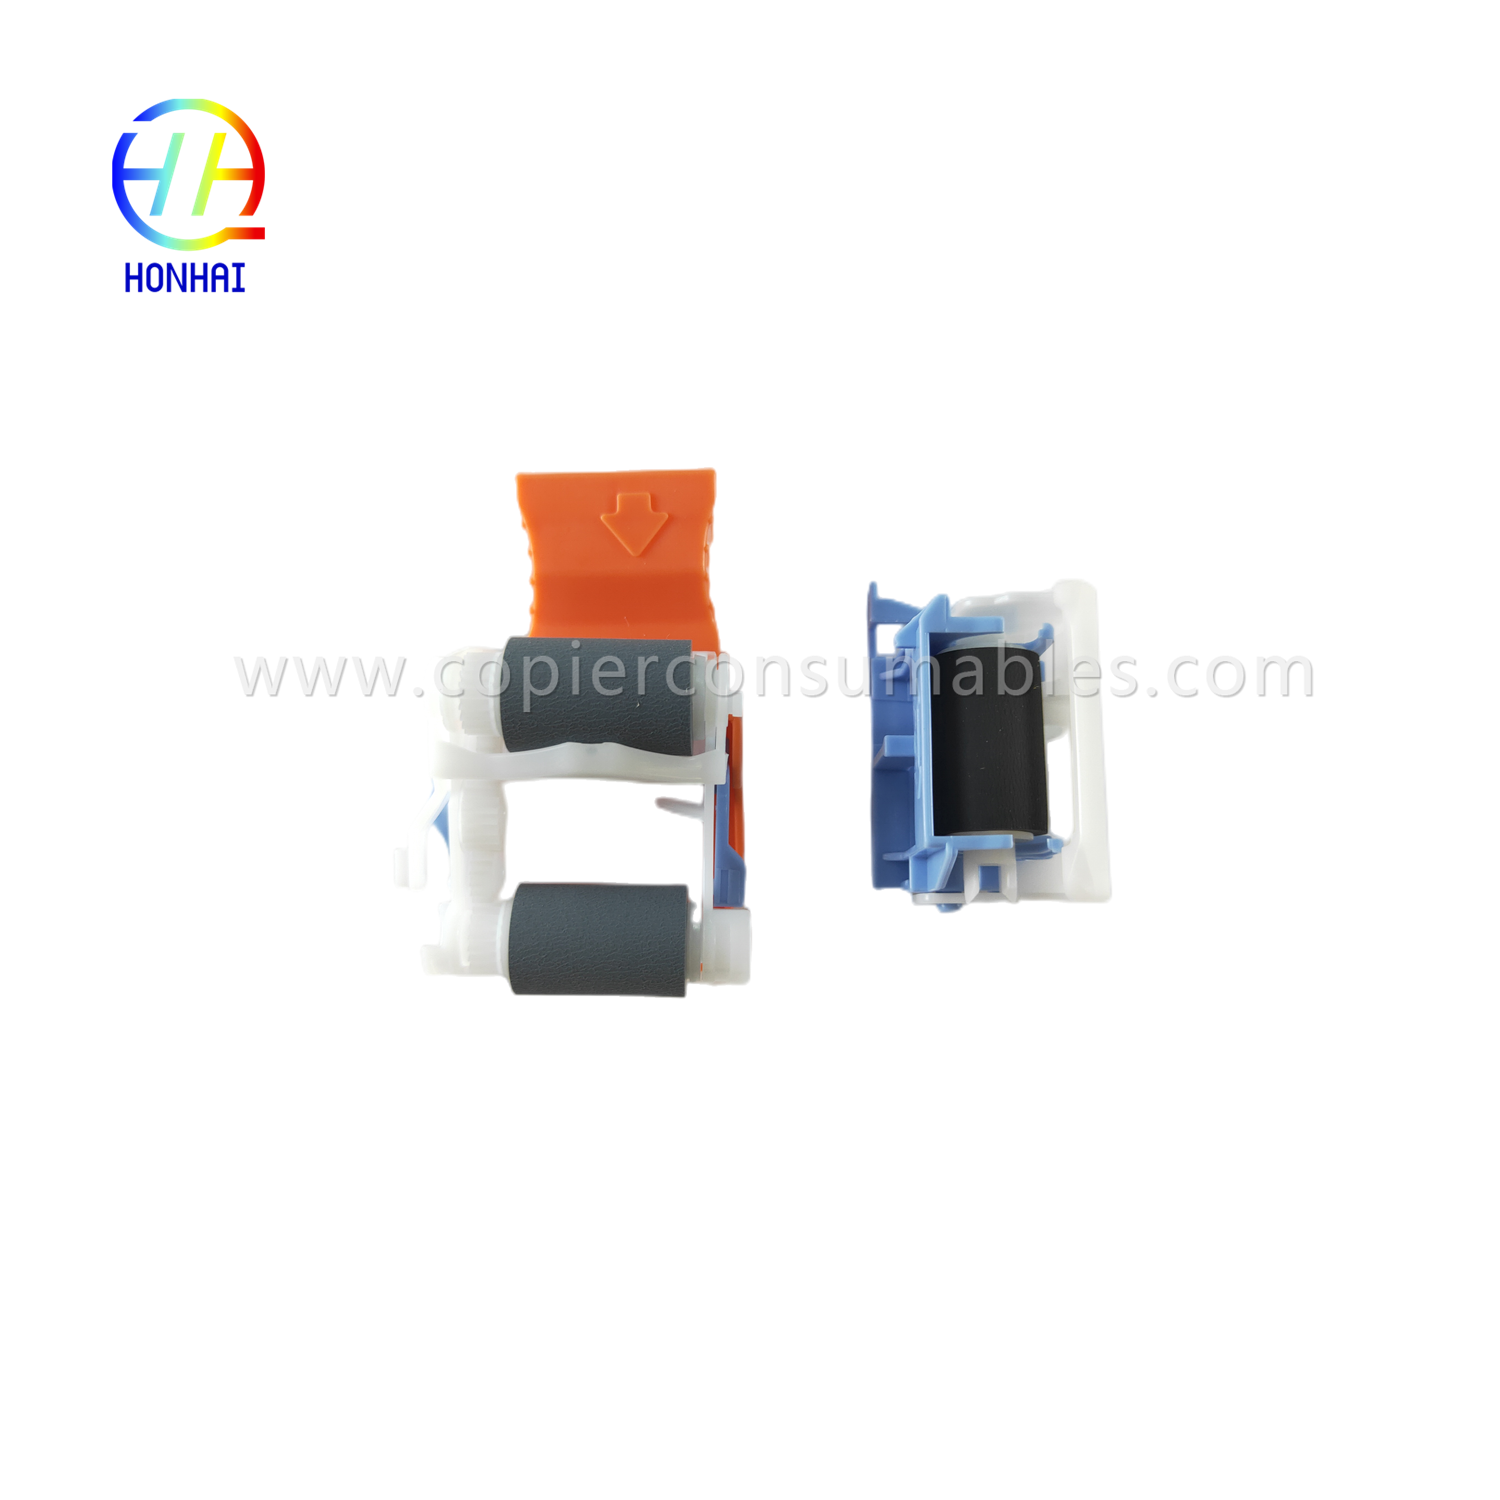 https://c585.goodao.net/separation-picup-feed-assemblies-for-hp-j8j70-67904-m607-m608-m609-product/